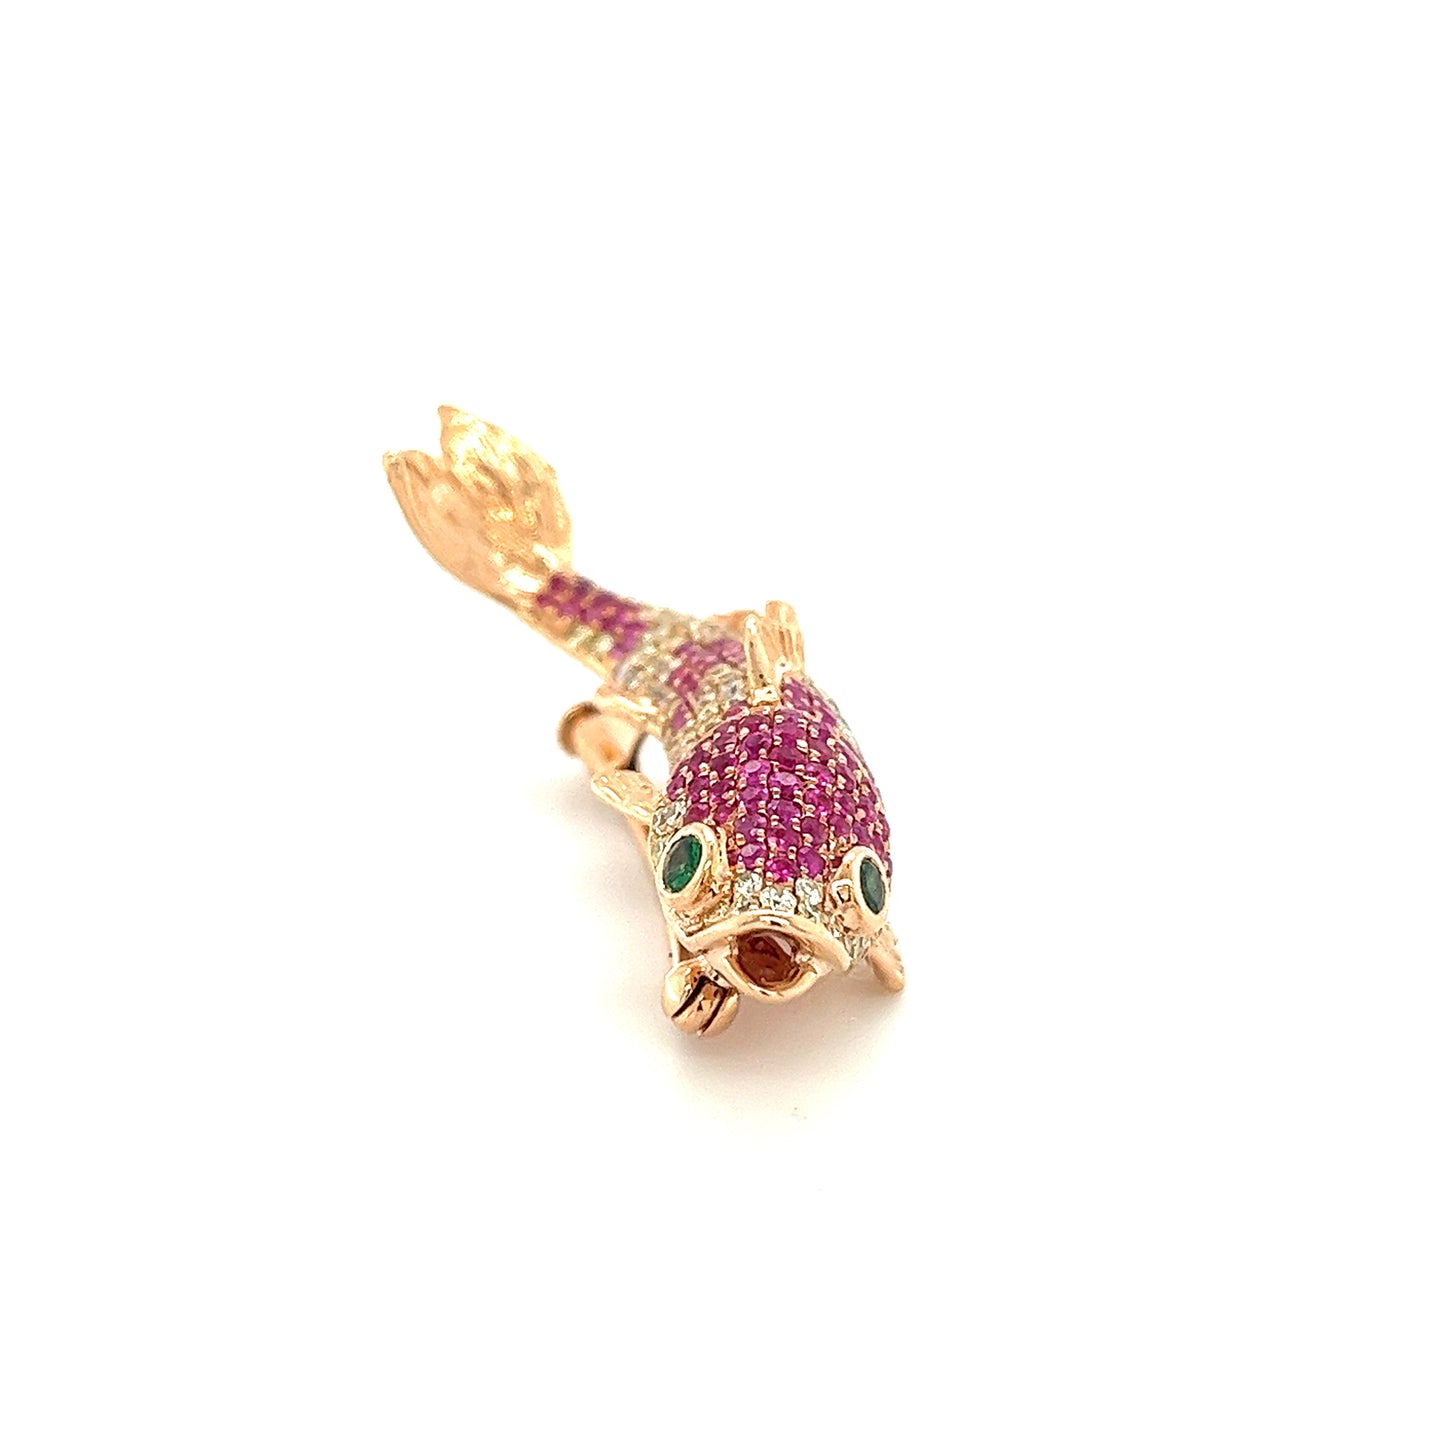 Load image into Gallery viewer, 18K Gold Fish Brooch with Diamonds Pink Sapphires and Rubies
